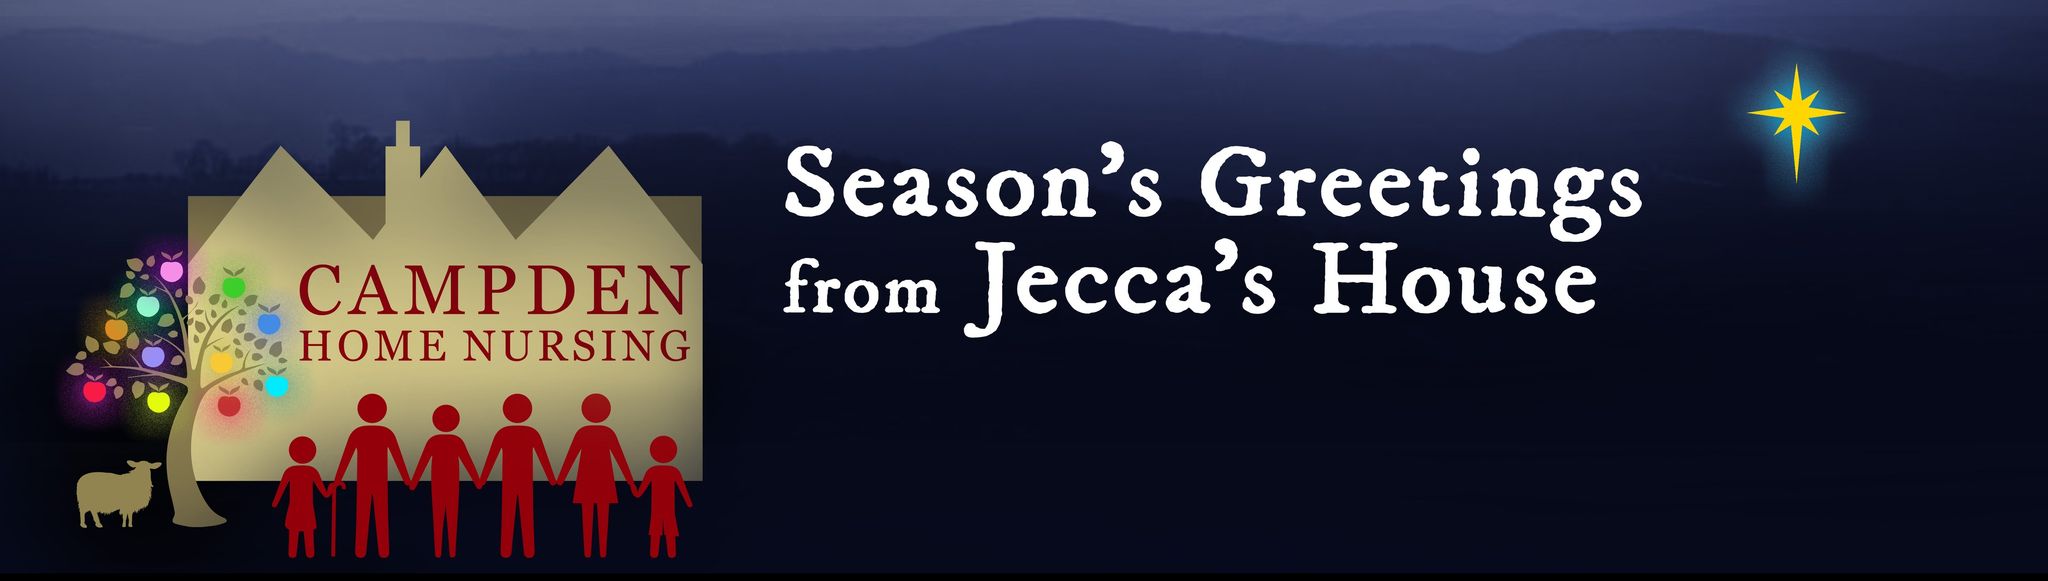 Season's Greetings from Jecca's House image